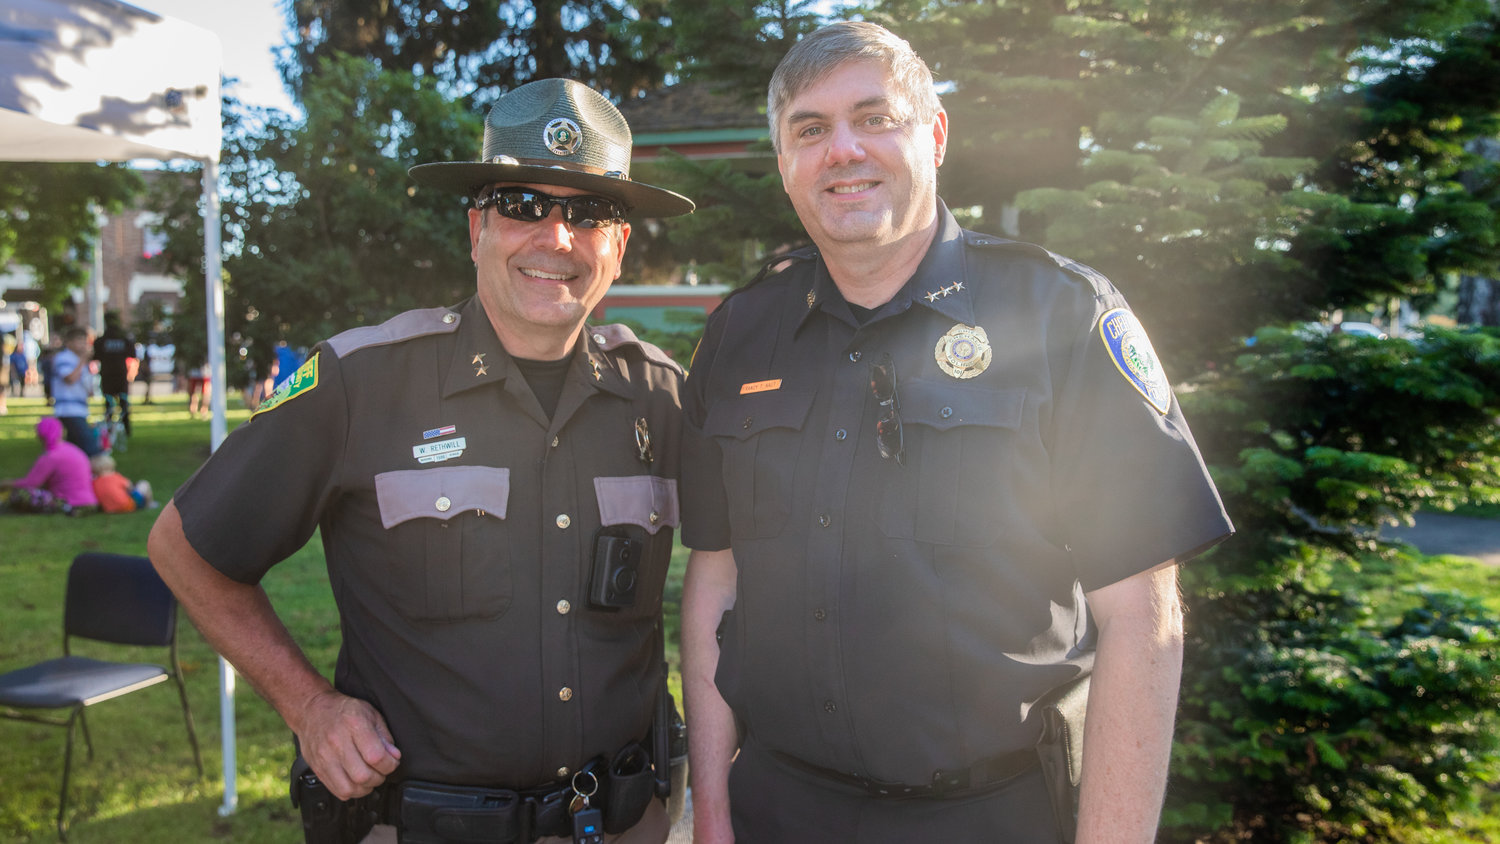 Undersheriff Wes Rethwill and Chehalis Police Chief Randy Kaut smile for a photo Tuesday in Centralia at George Washington Park during a National Night Out event.